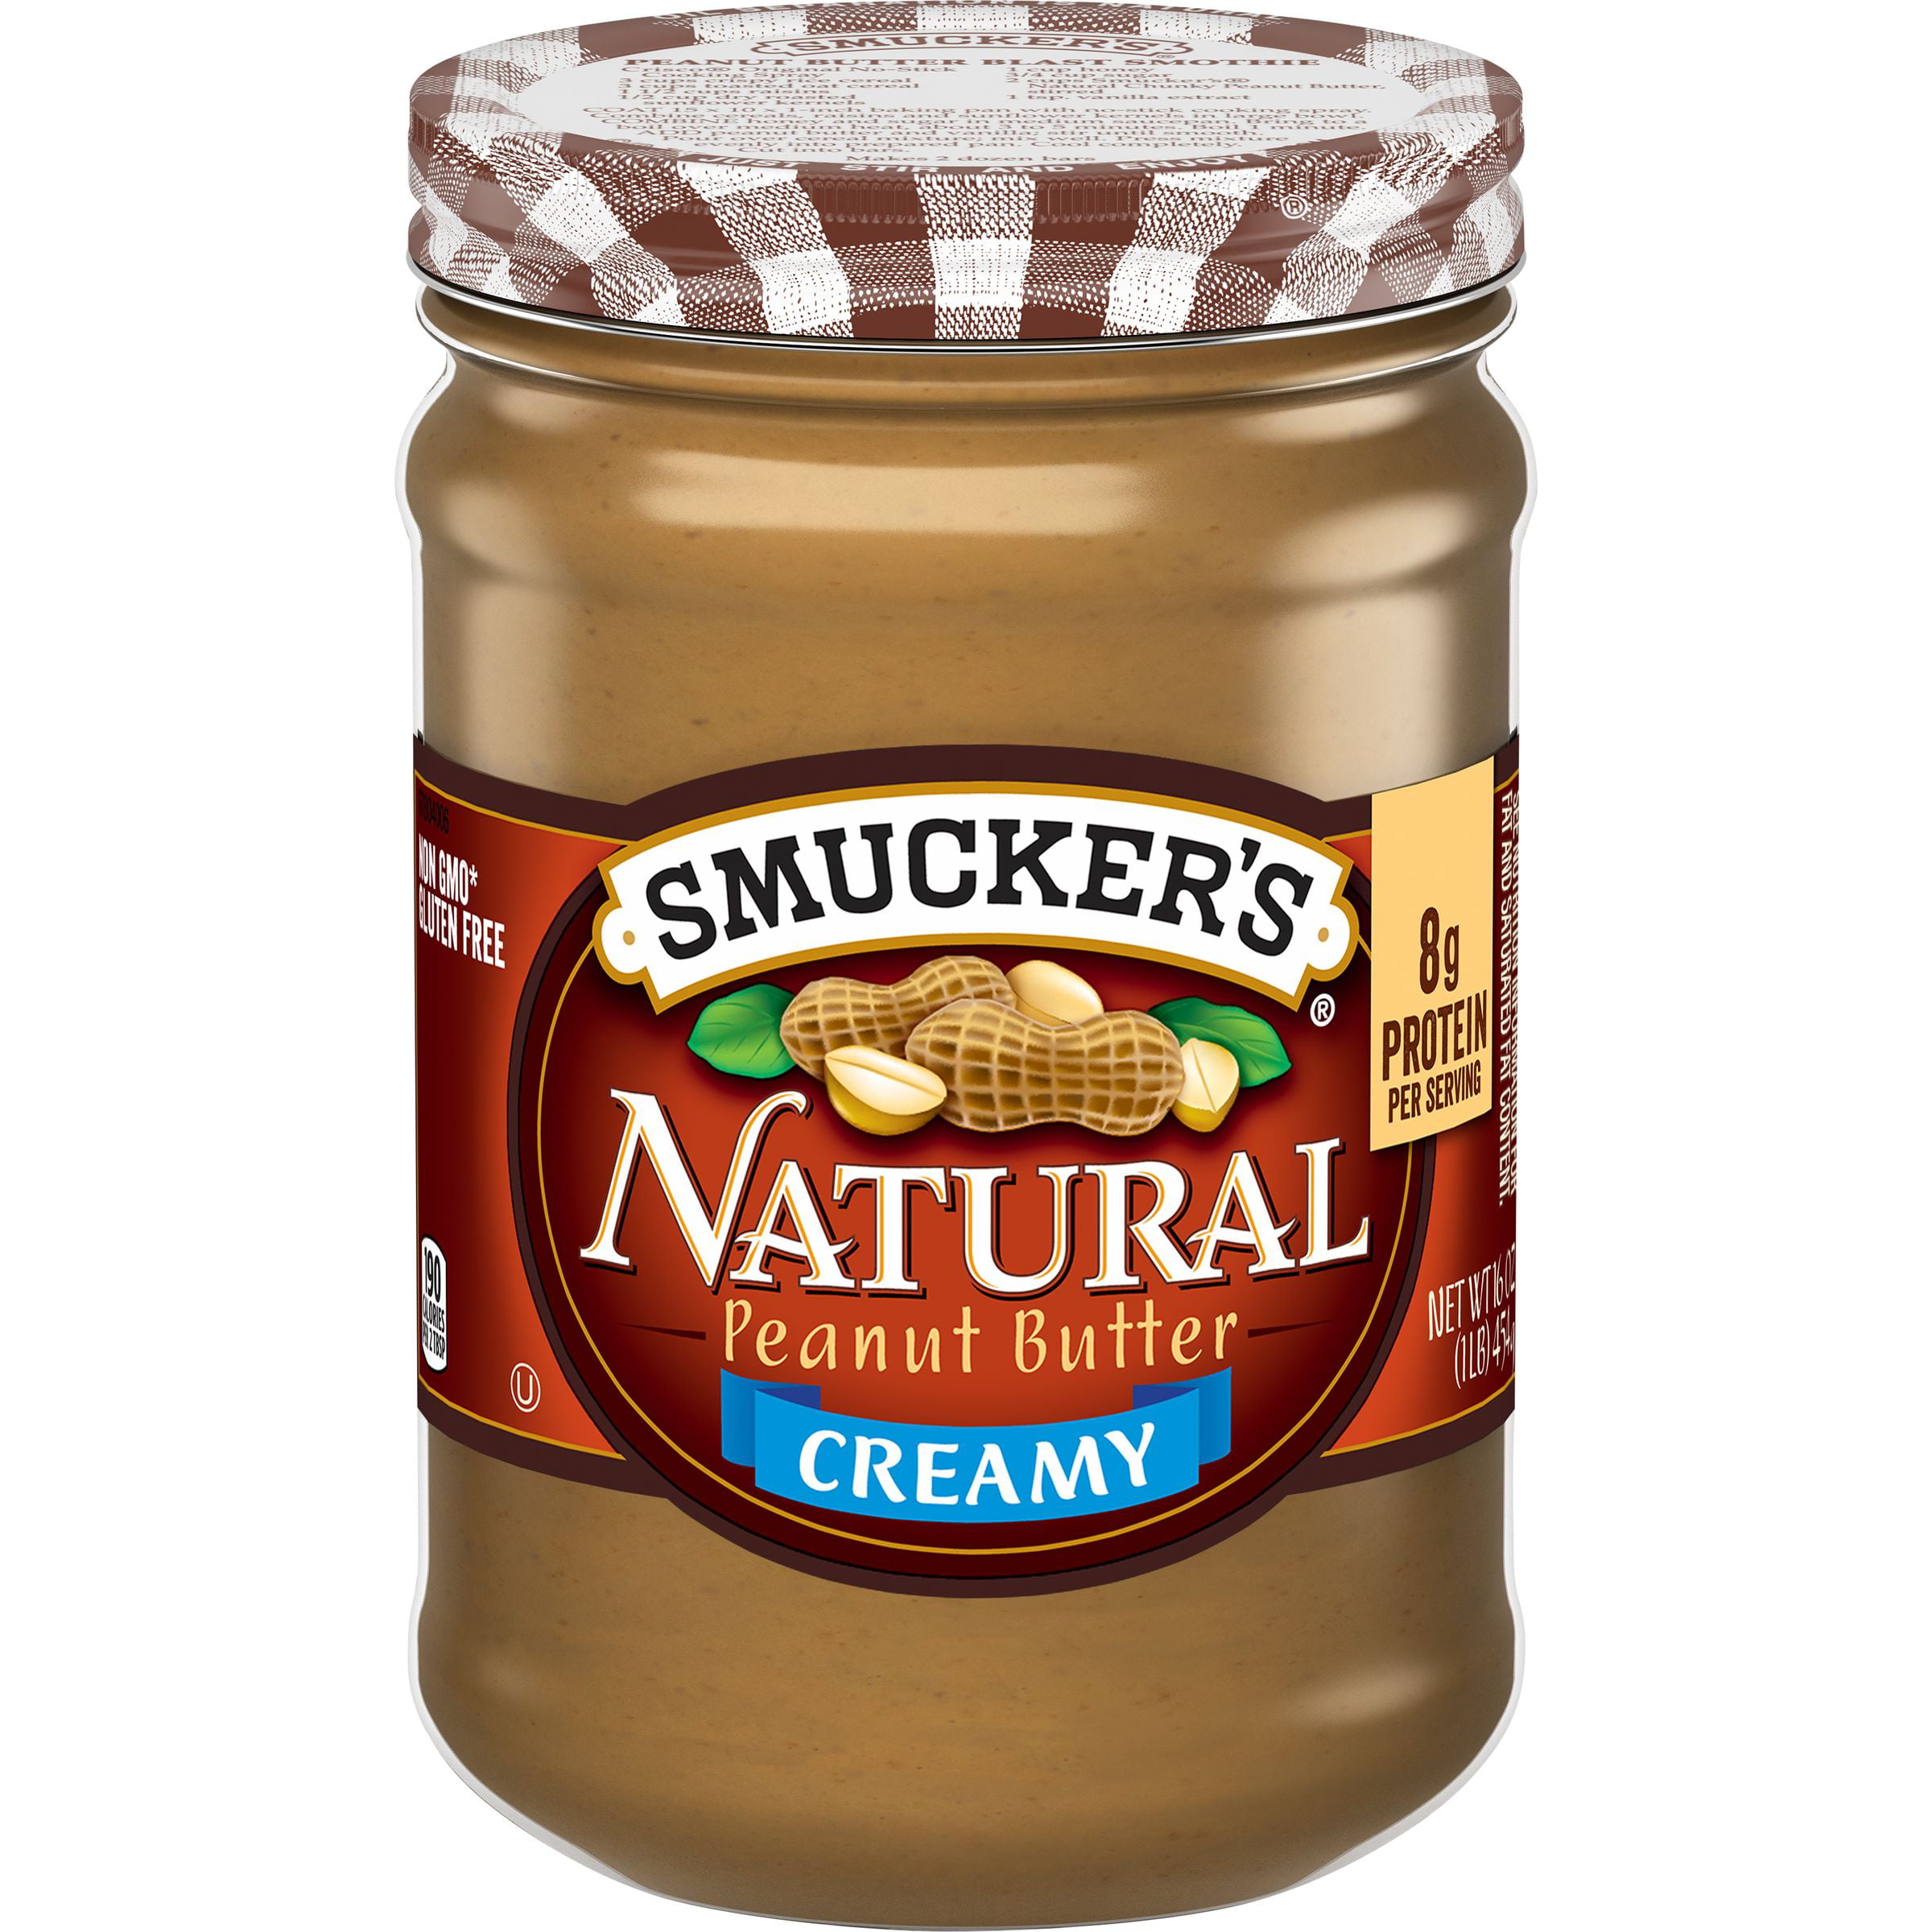 Peanut butter from Smucker’s is a great ingredient to use for a healthy at-home lunch that is high in protein and quick to make